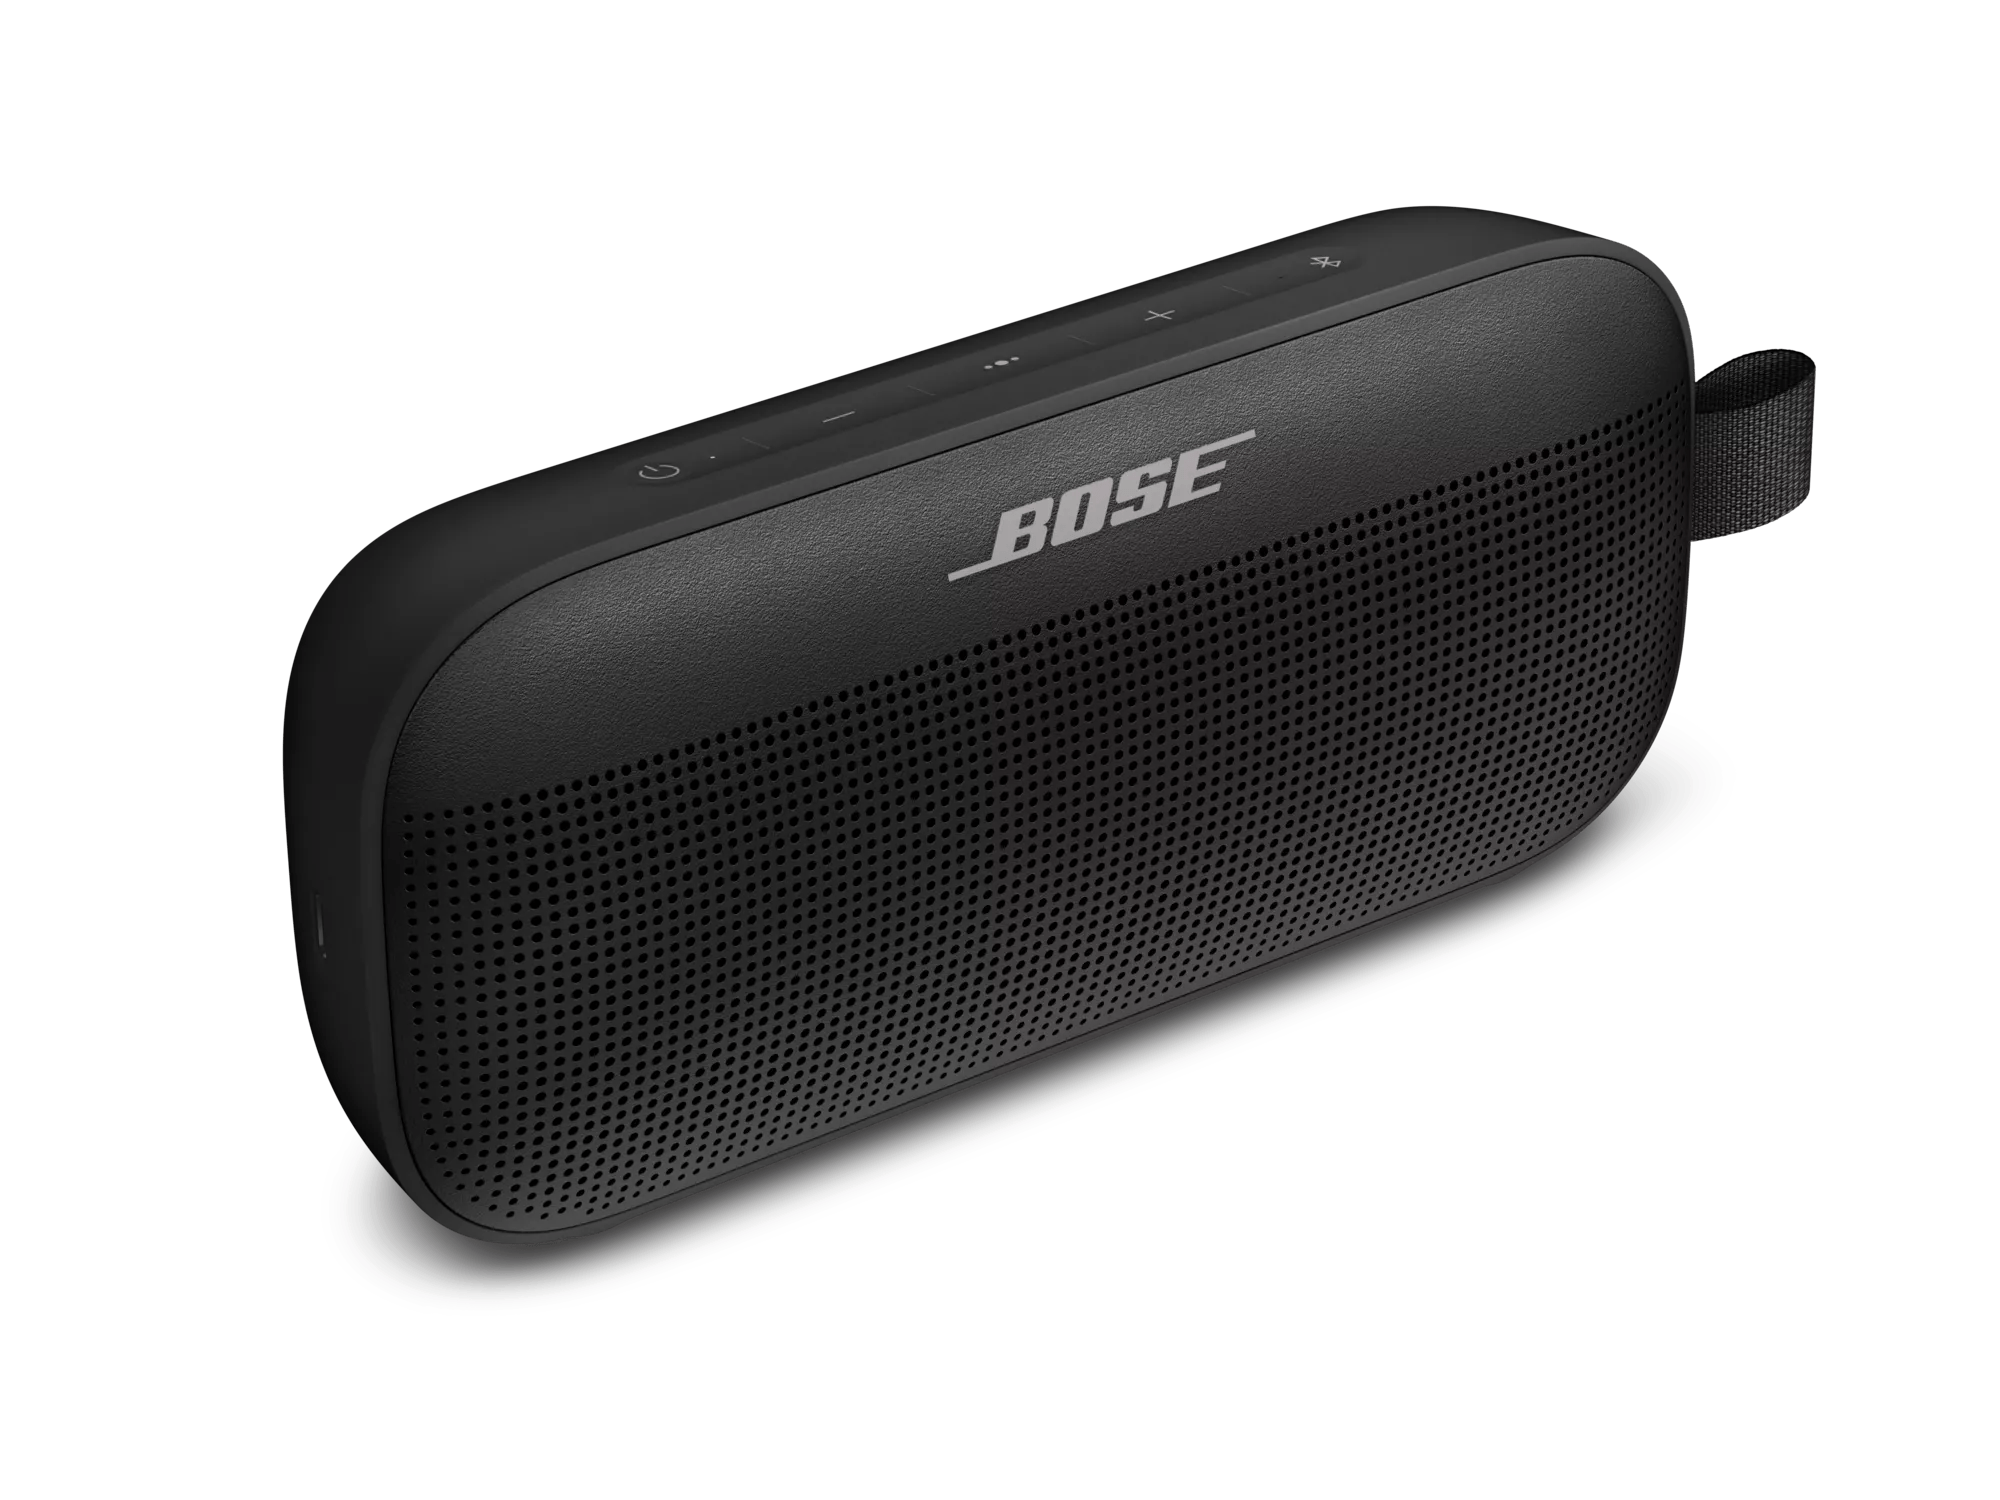 Product Support for Bose Speakers / Portable Speakers